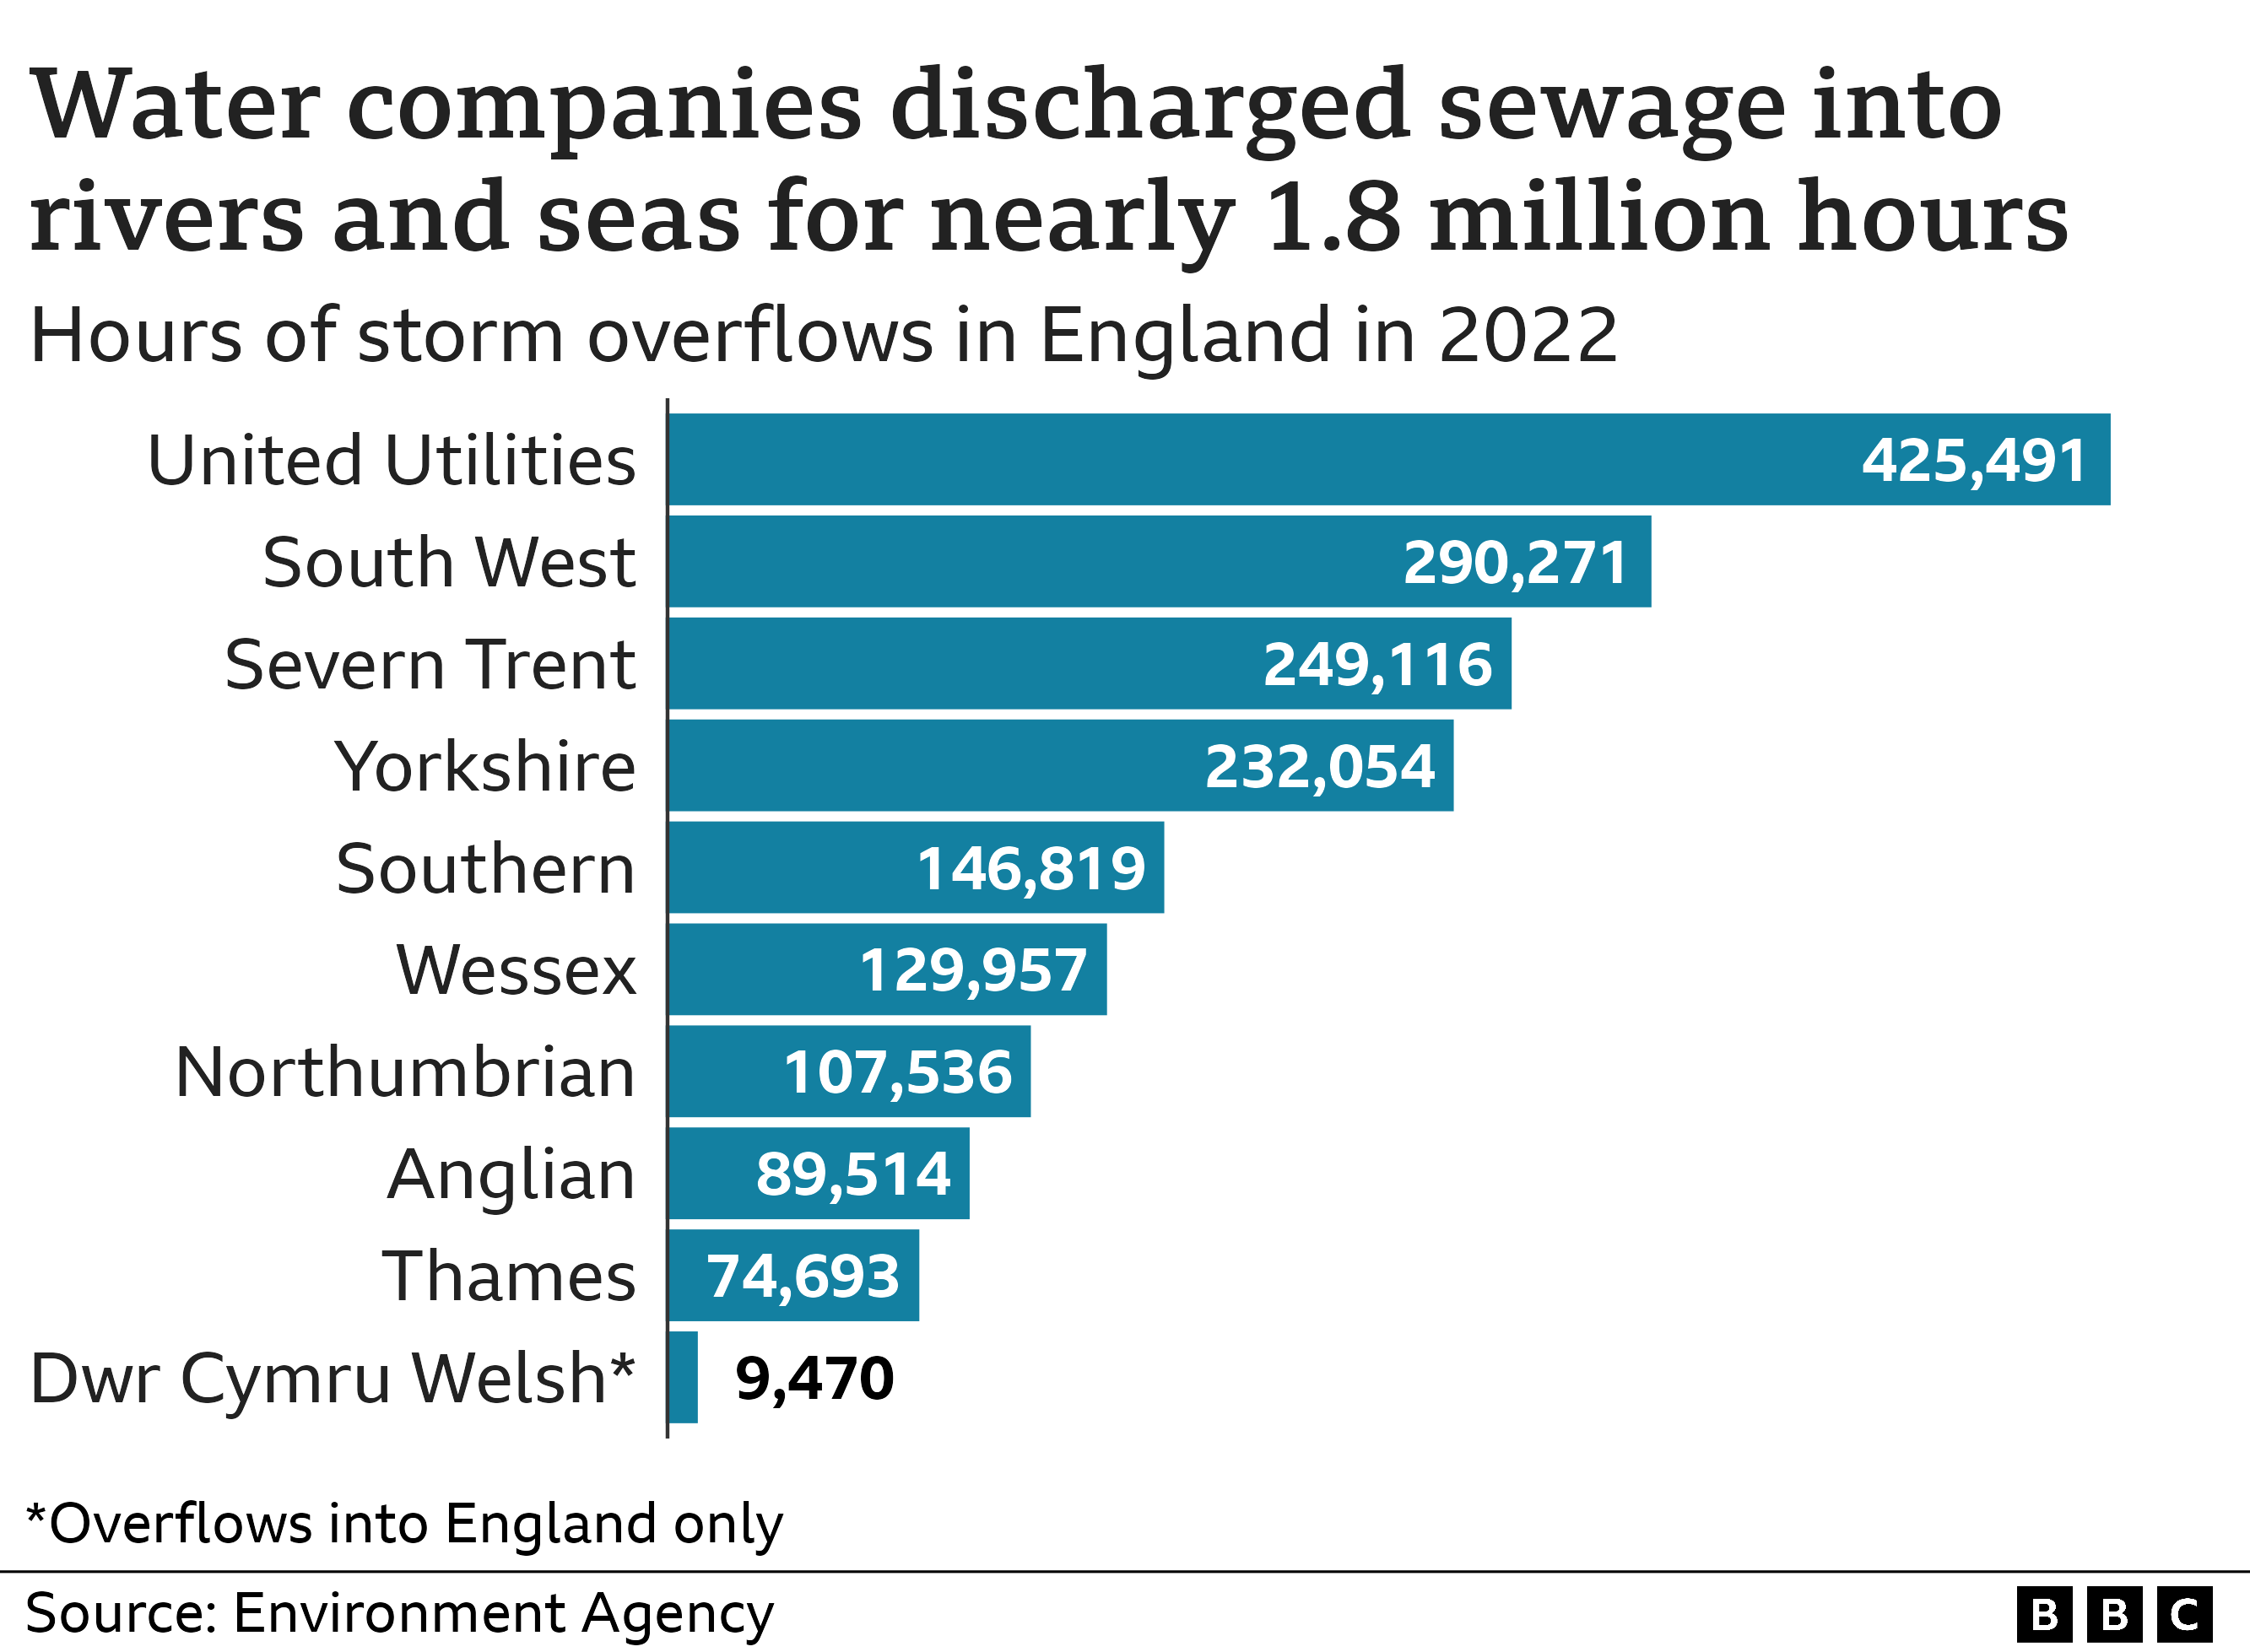 A chart showing water companies in England and how many hours they discharged sewage into England's waters in 2022, with United Utilities at the top with over 425,000 hours